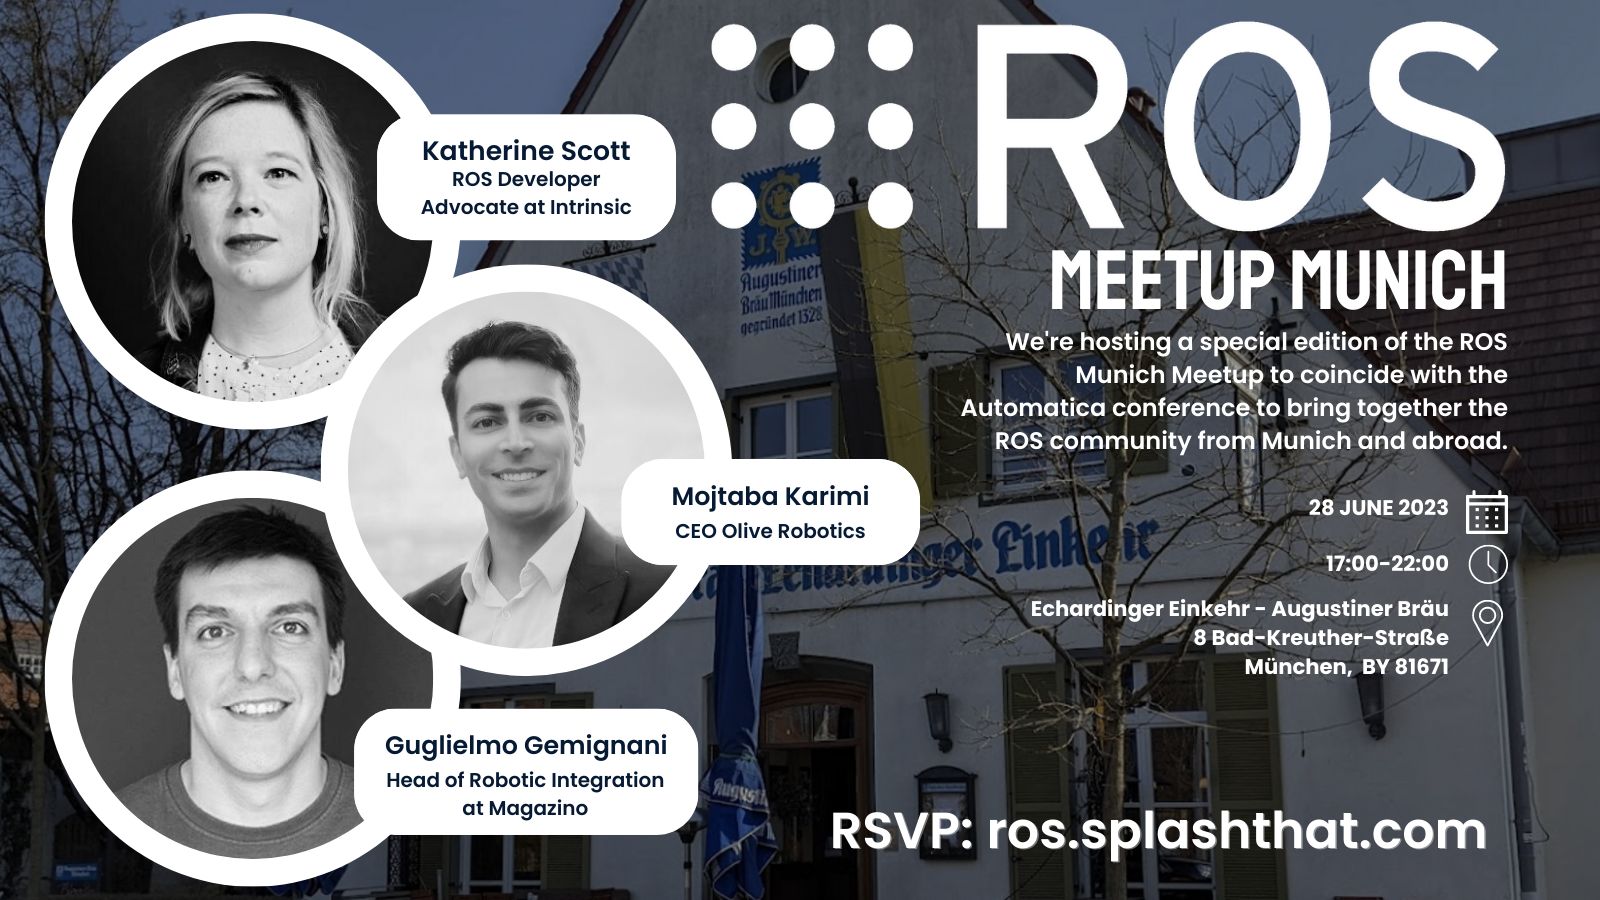 Join Olive Robotics for an exciting #ROS meetup in Munich on June 28th